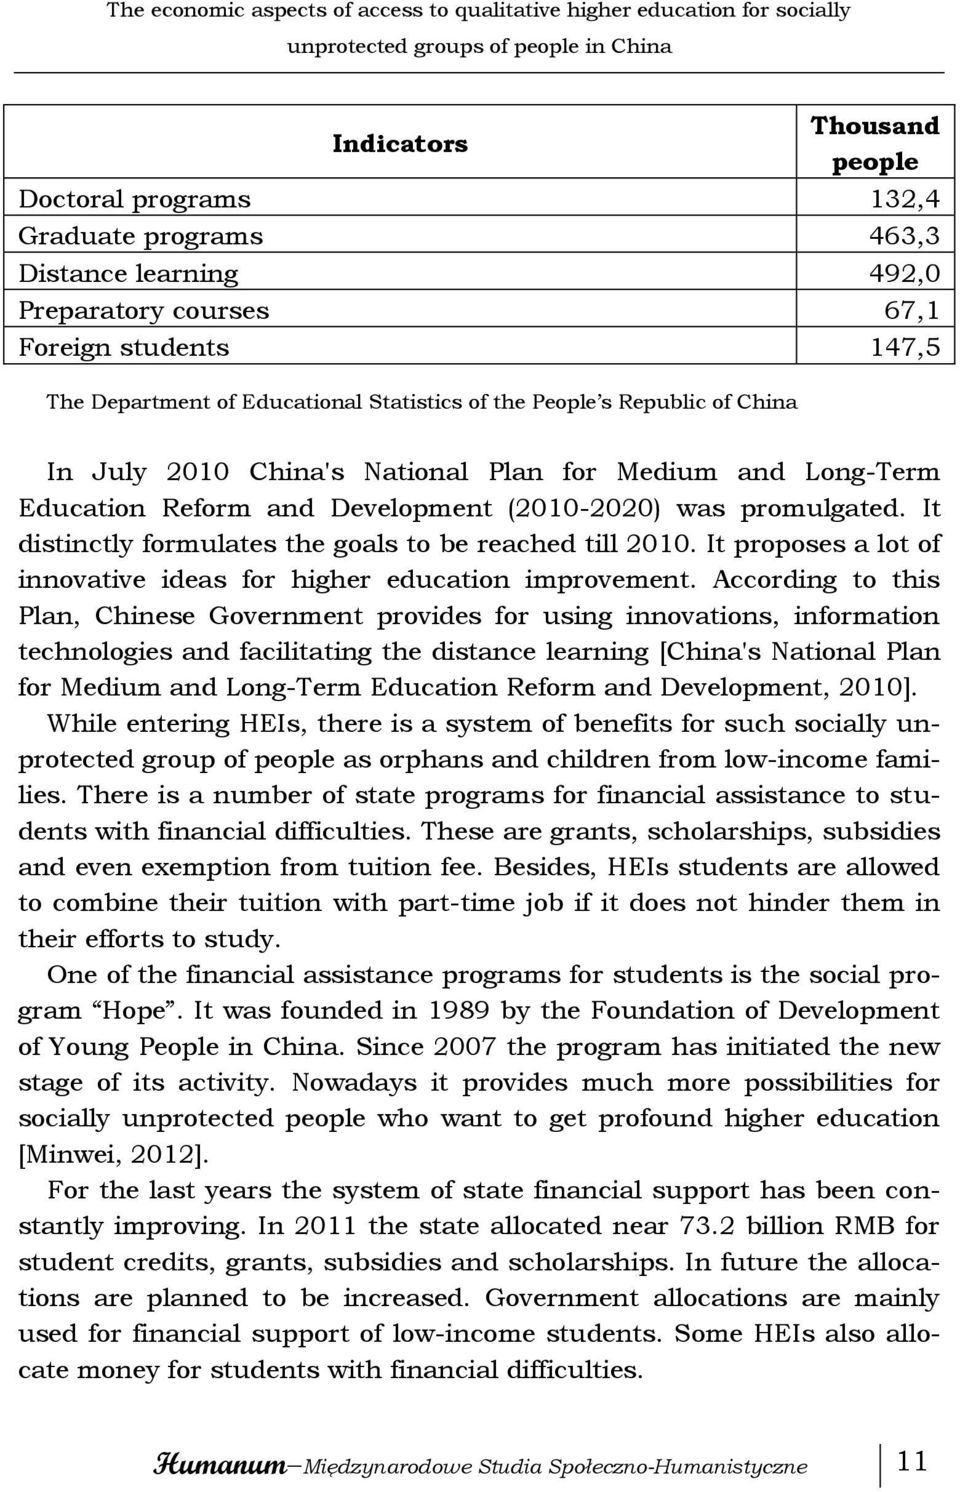 Education Reform and Development (2010-2020) was promulgated. It distinctly formulates the goals to be reached till 2010. It proposes a lot of innovative ideas for higher education improvement.